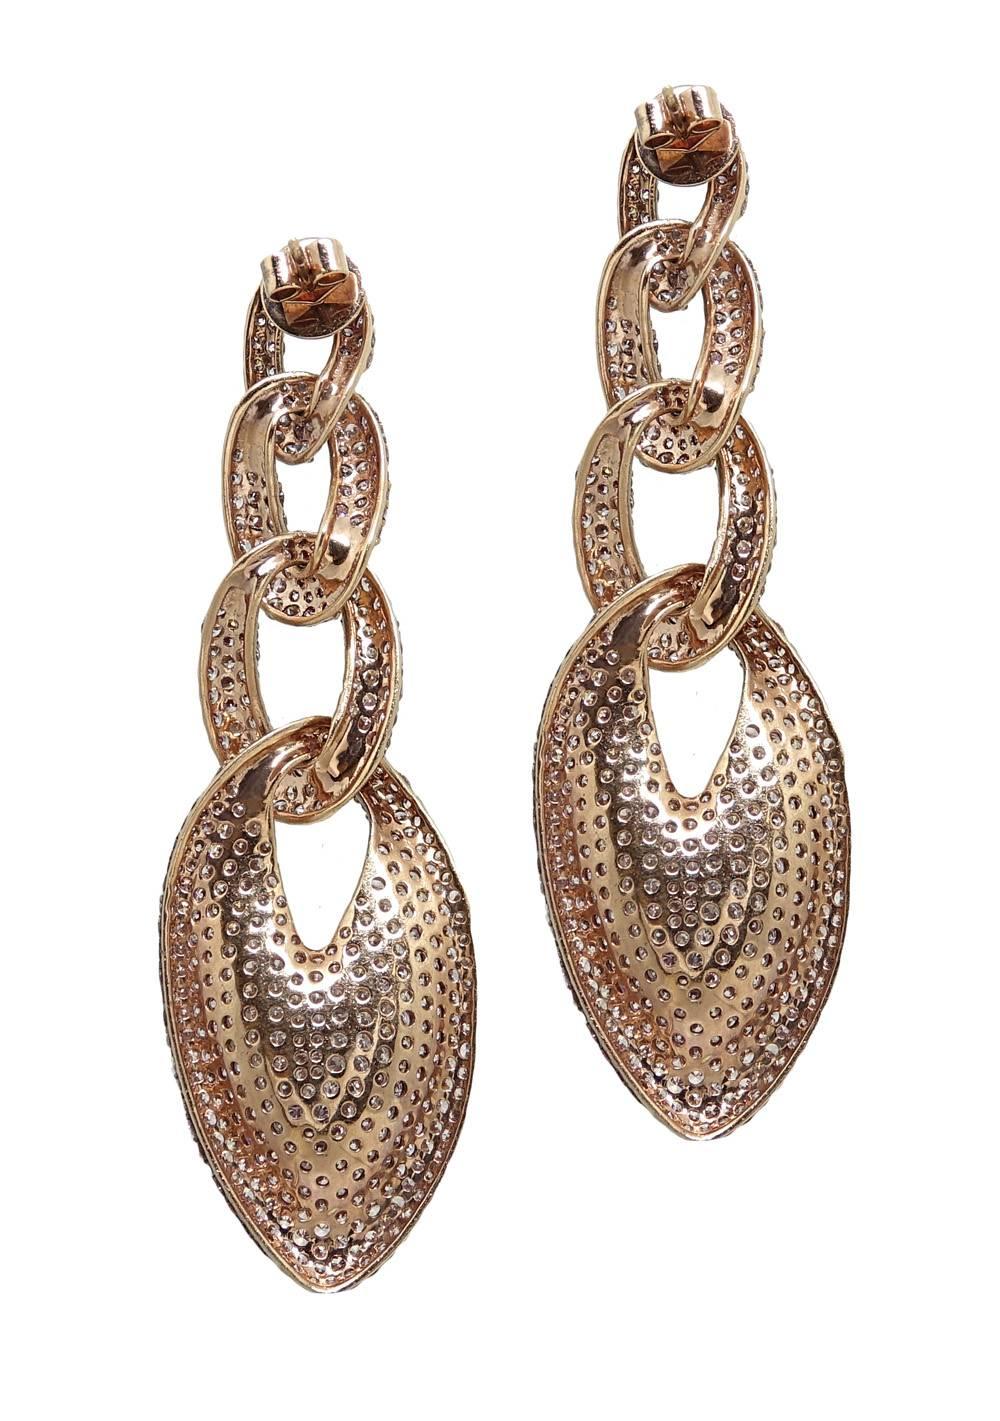 These Sparkling 18K Rose Gold Dangling Earrings Are Covered In Gorgeous Pink Diamonds Weighing A Total Carat Weight Of 12.18 Carats. These Earrings Are About 2 Inches In Length.